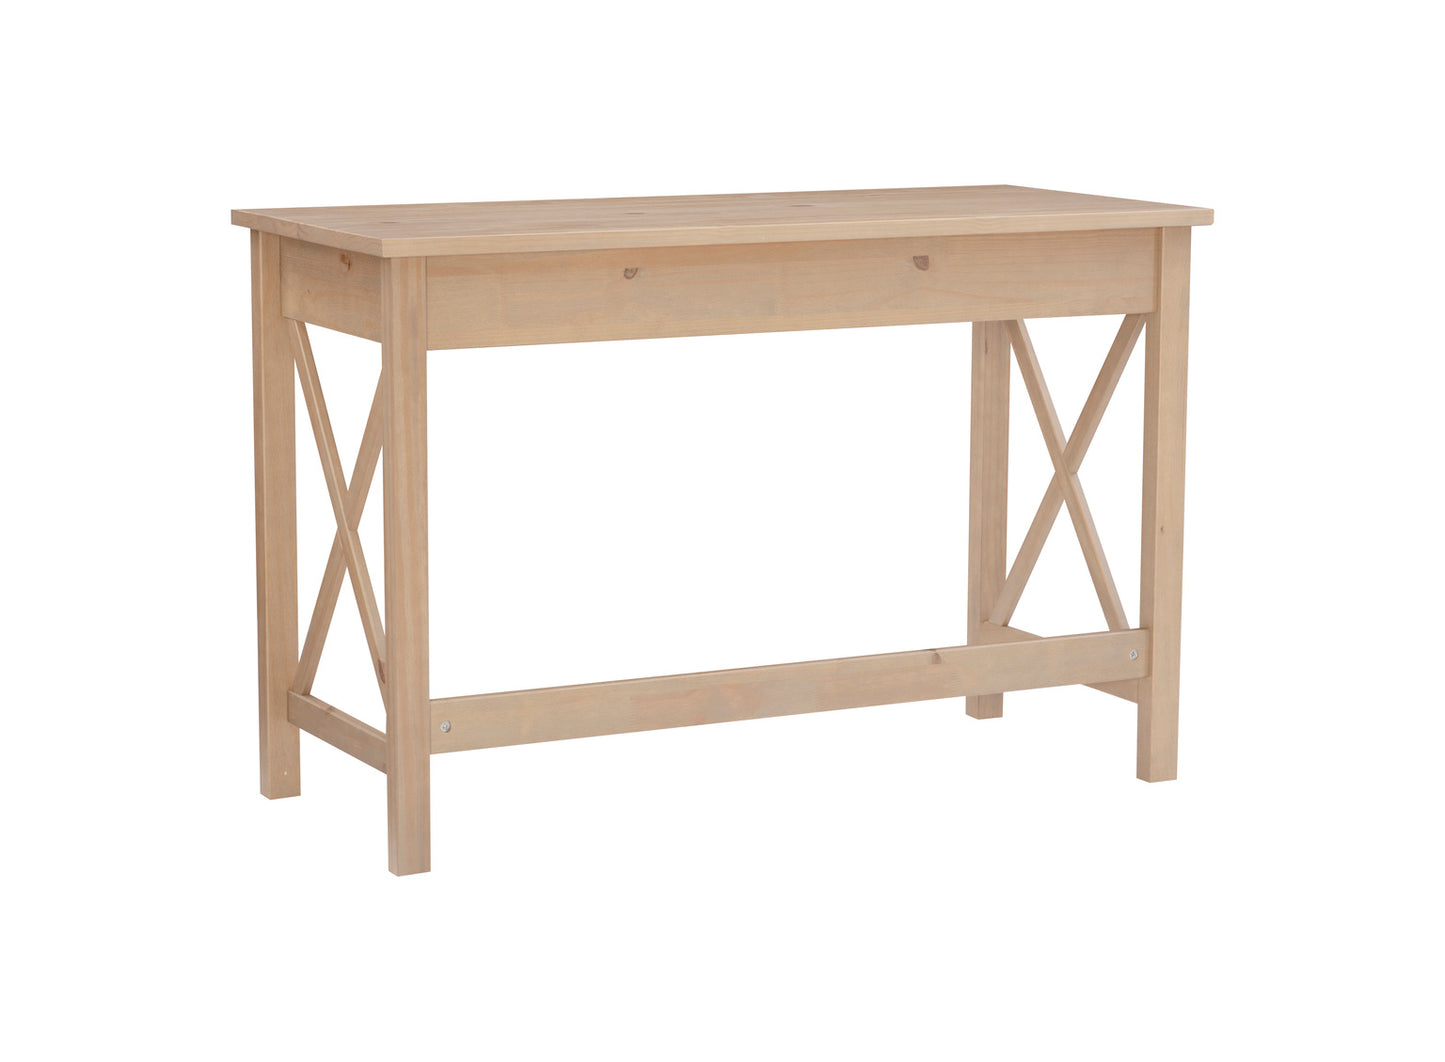 Natural Dover Lover Laptop Desk with One Drawer